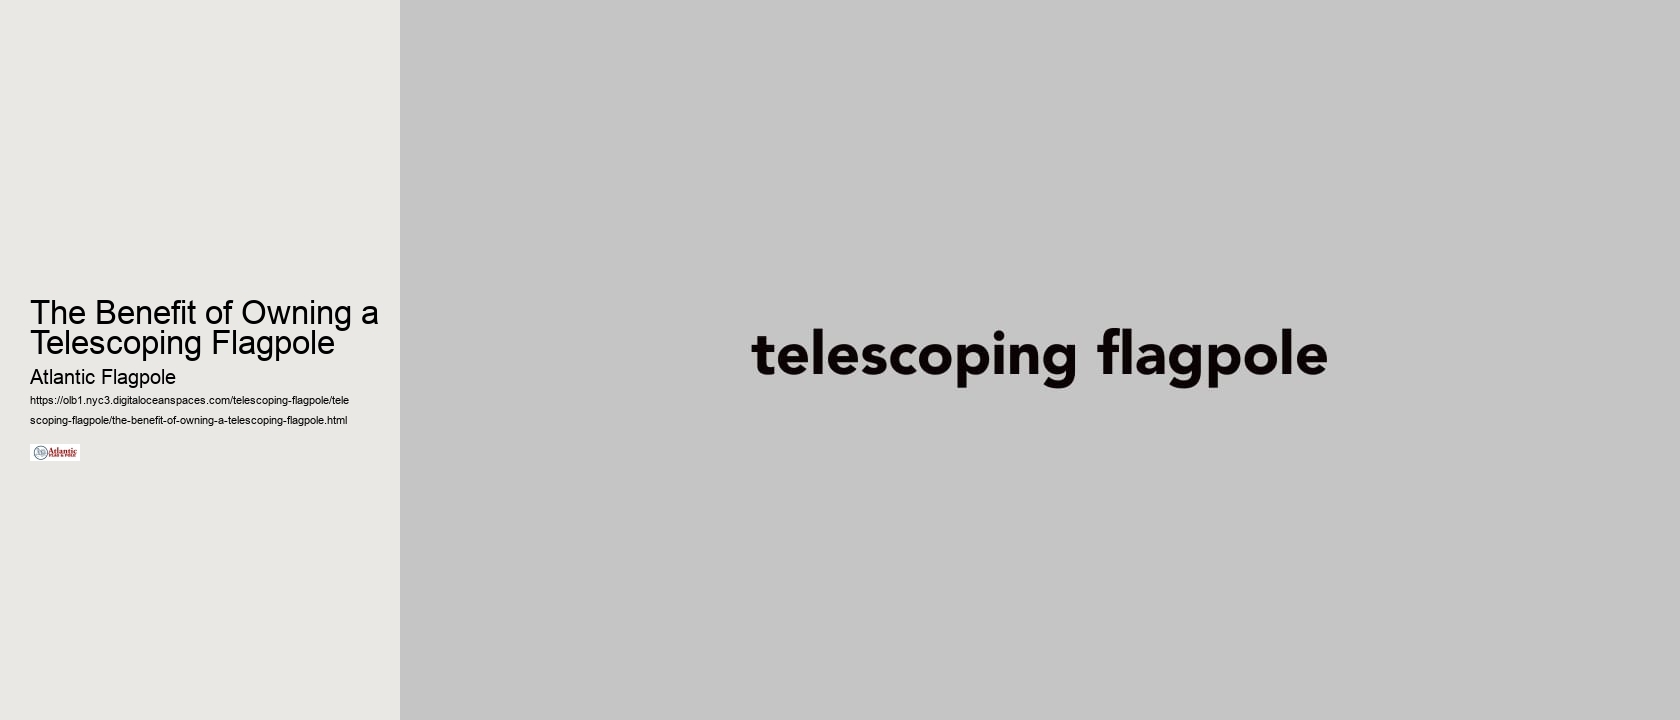 The Benefit of Owning a Telescoping Flagpole